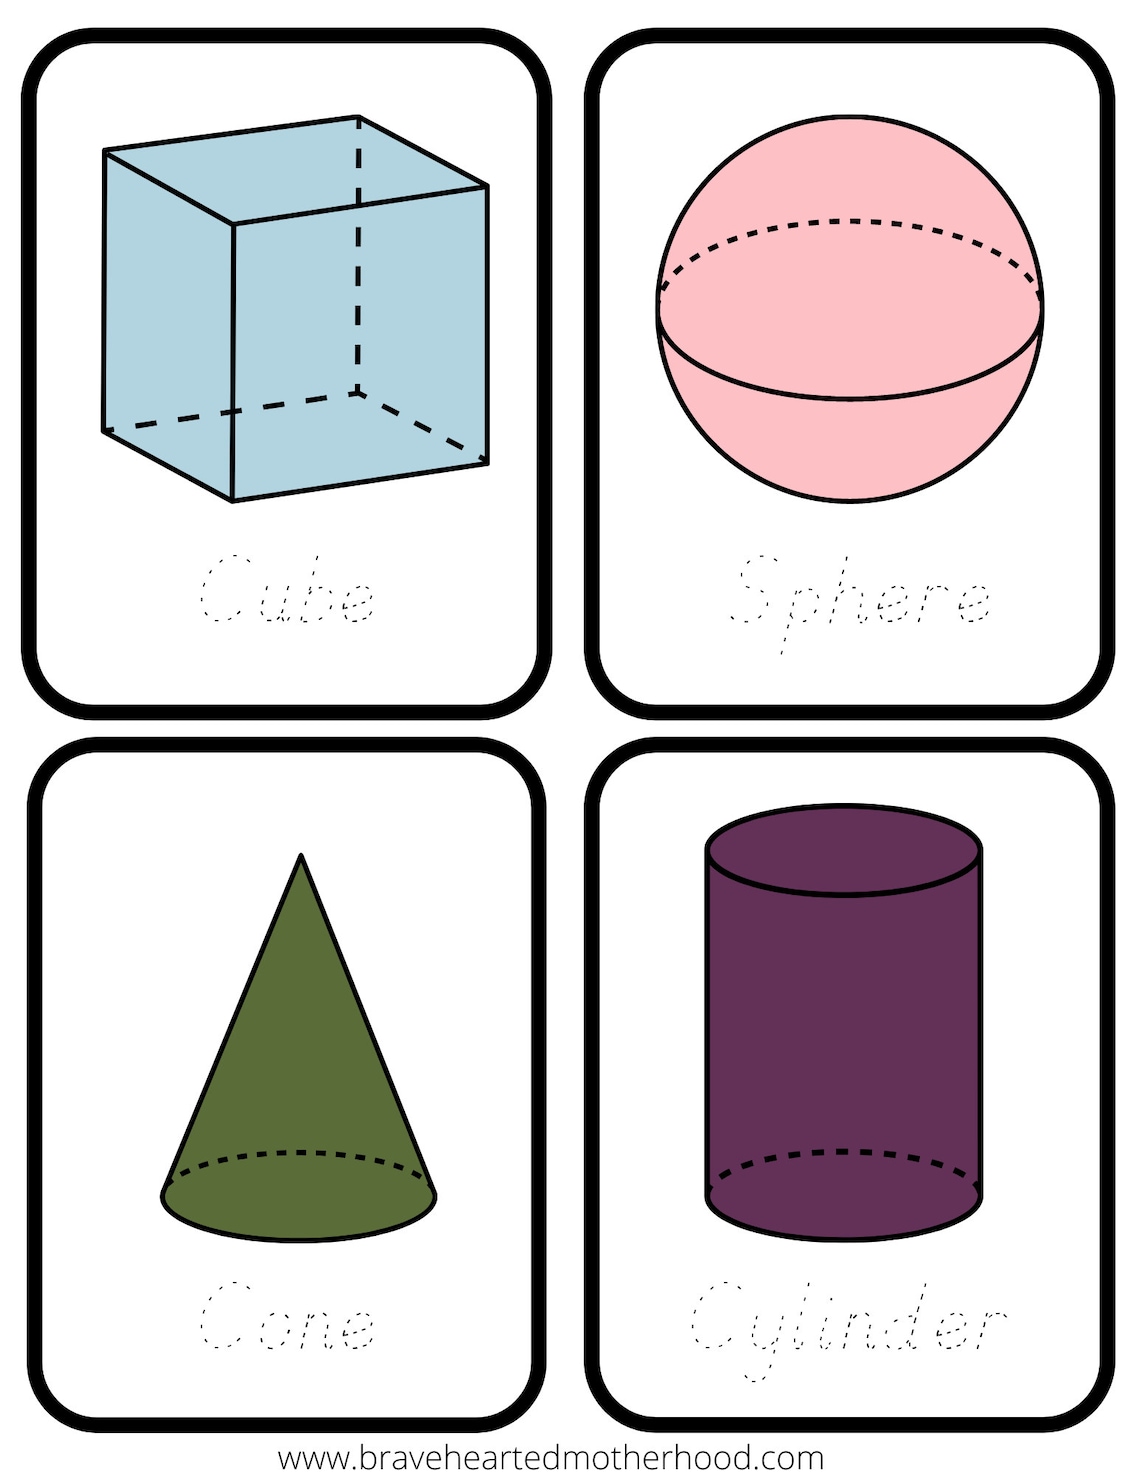 geometry-flash-cards-for-early-learning-etsy